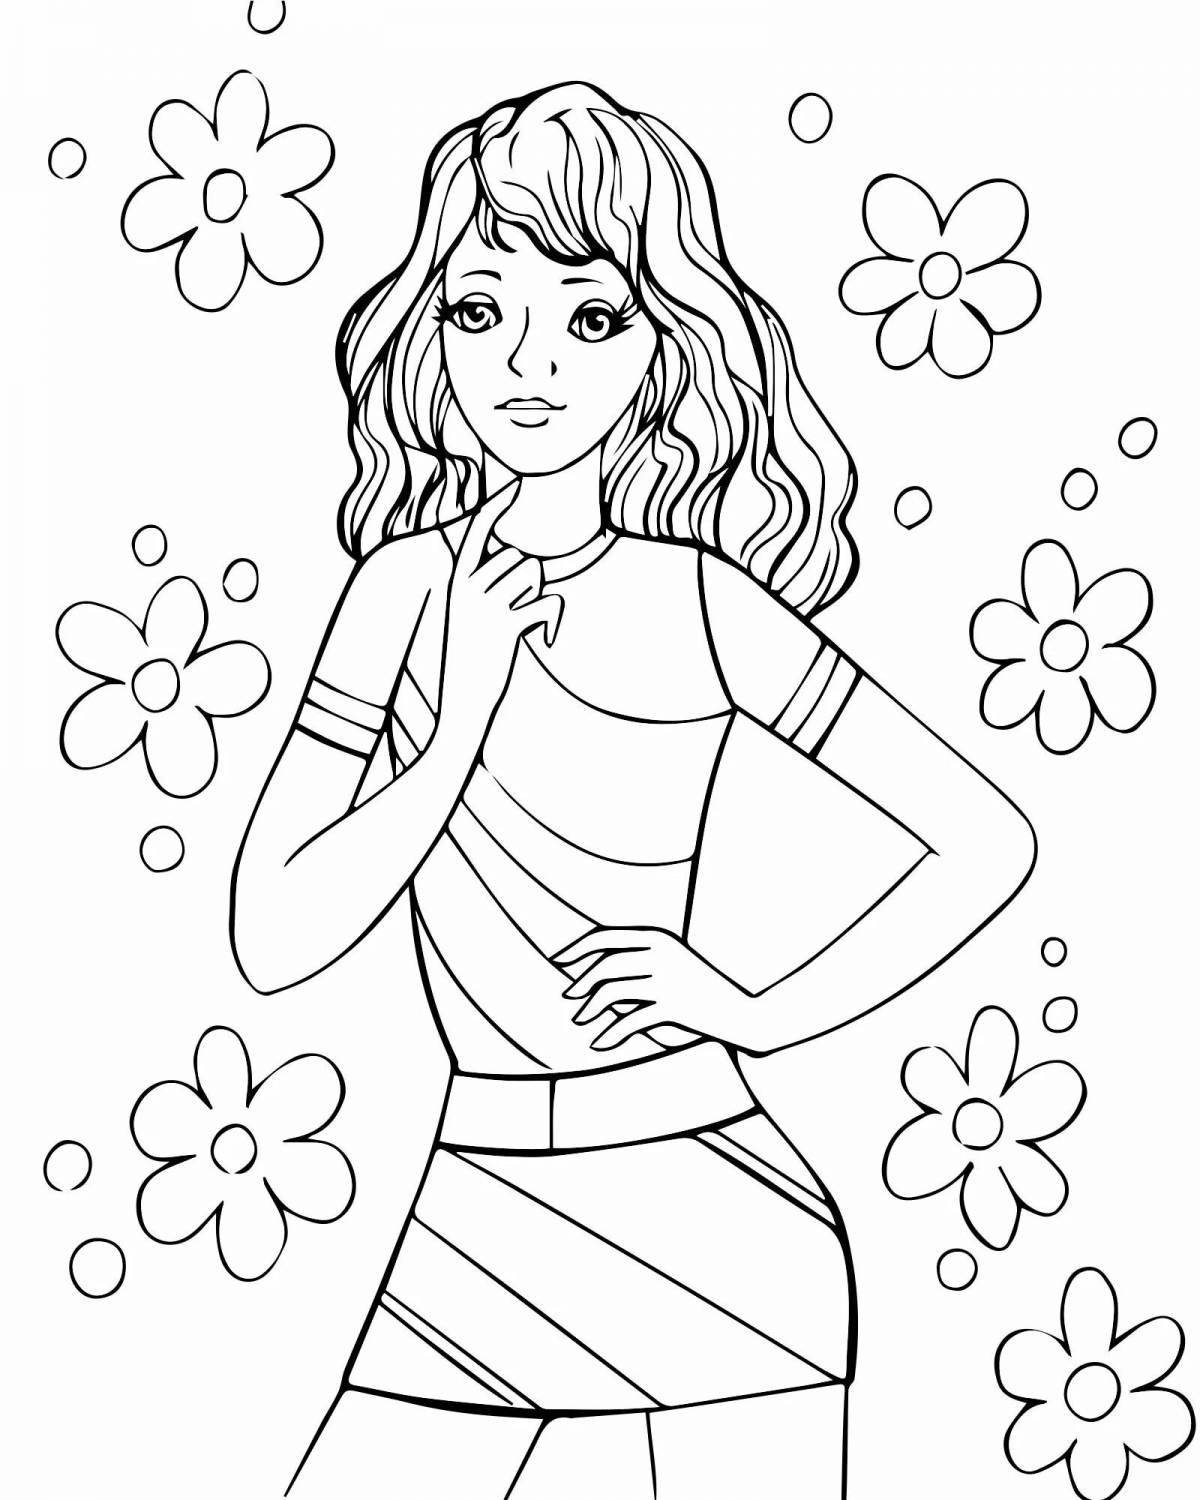 Creative coloring book for 11-13 year olds